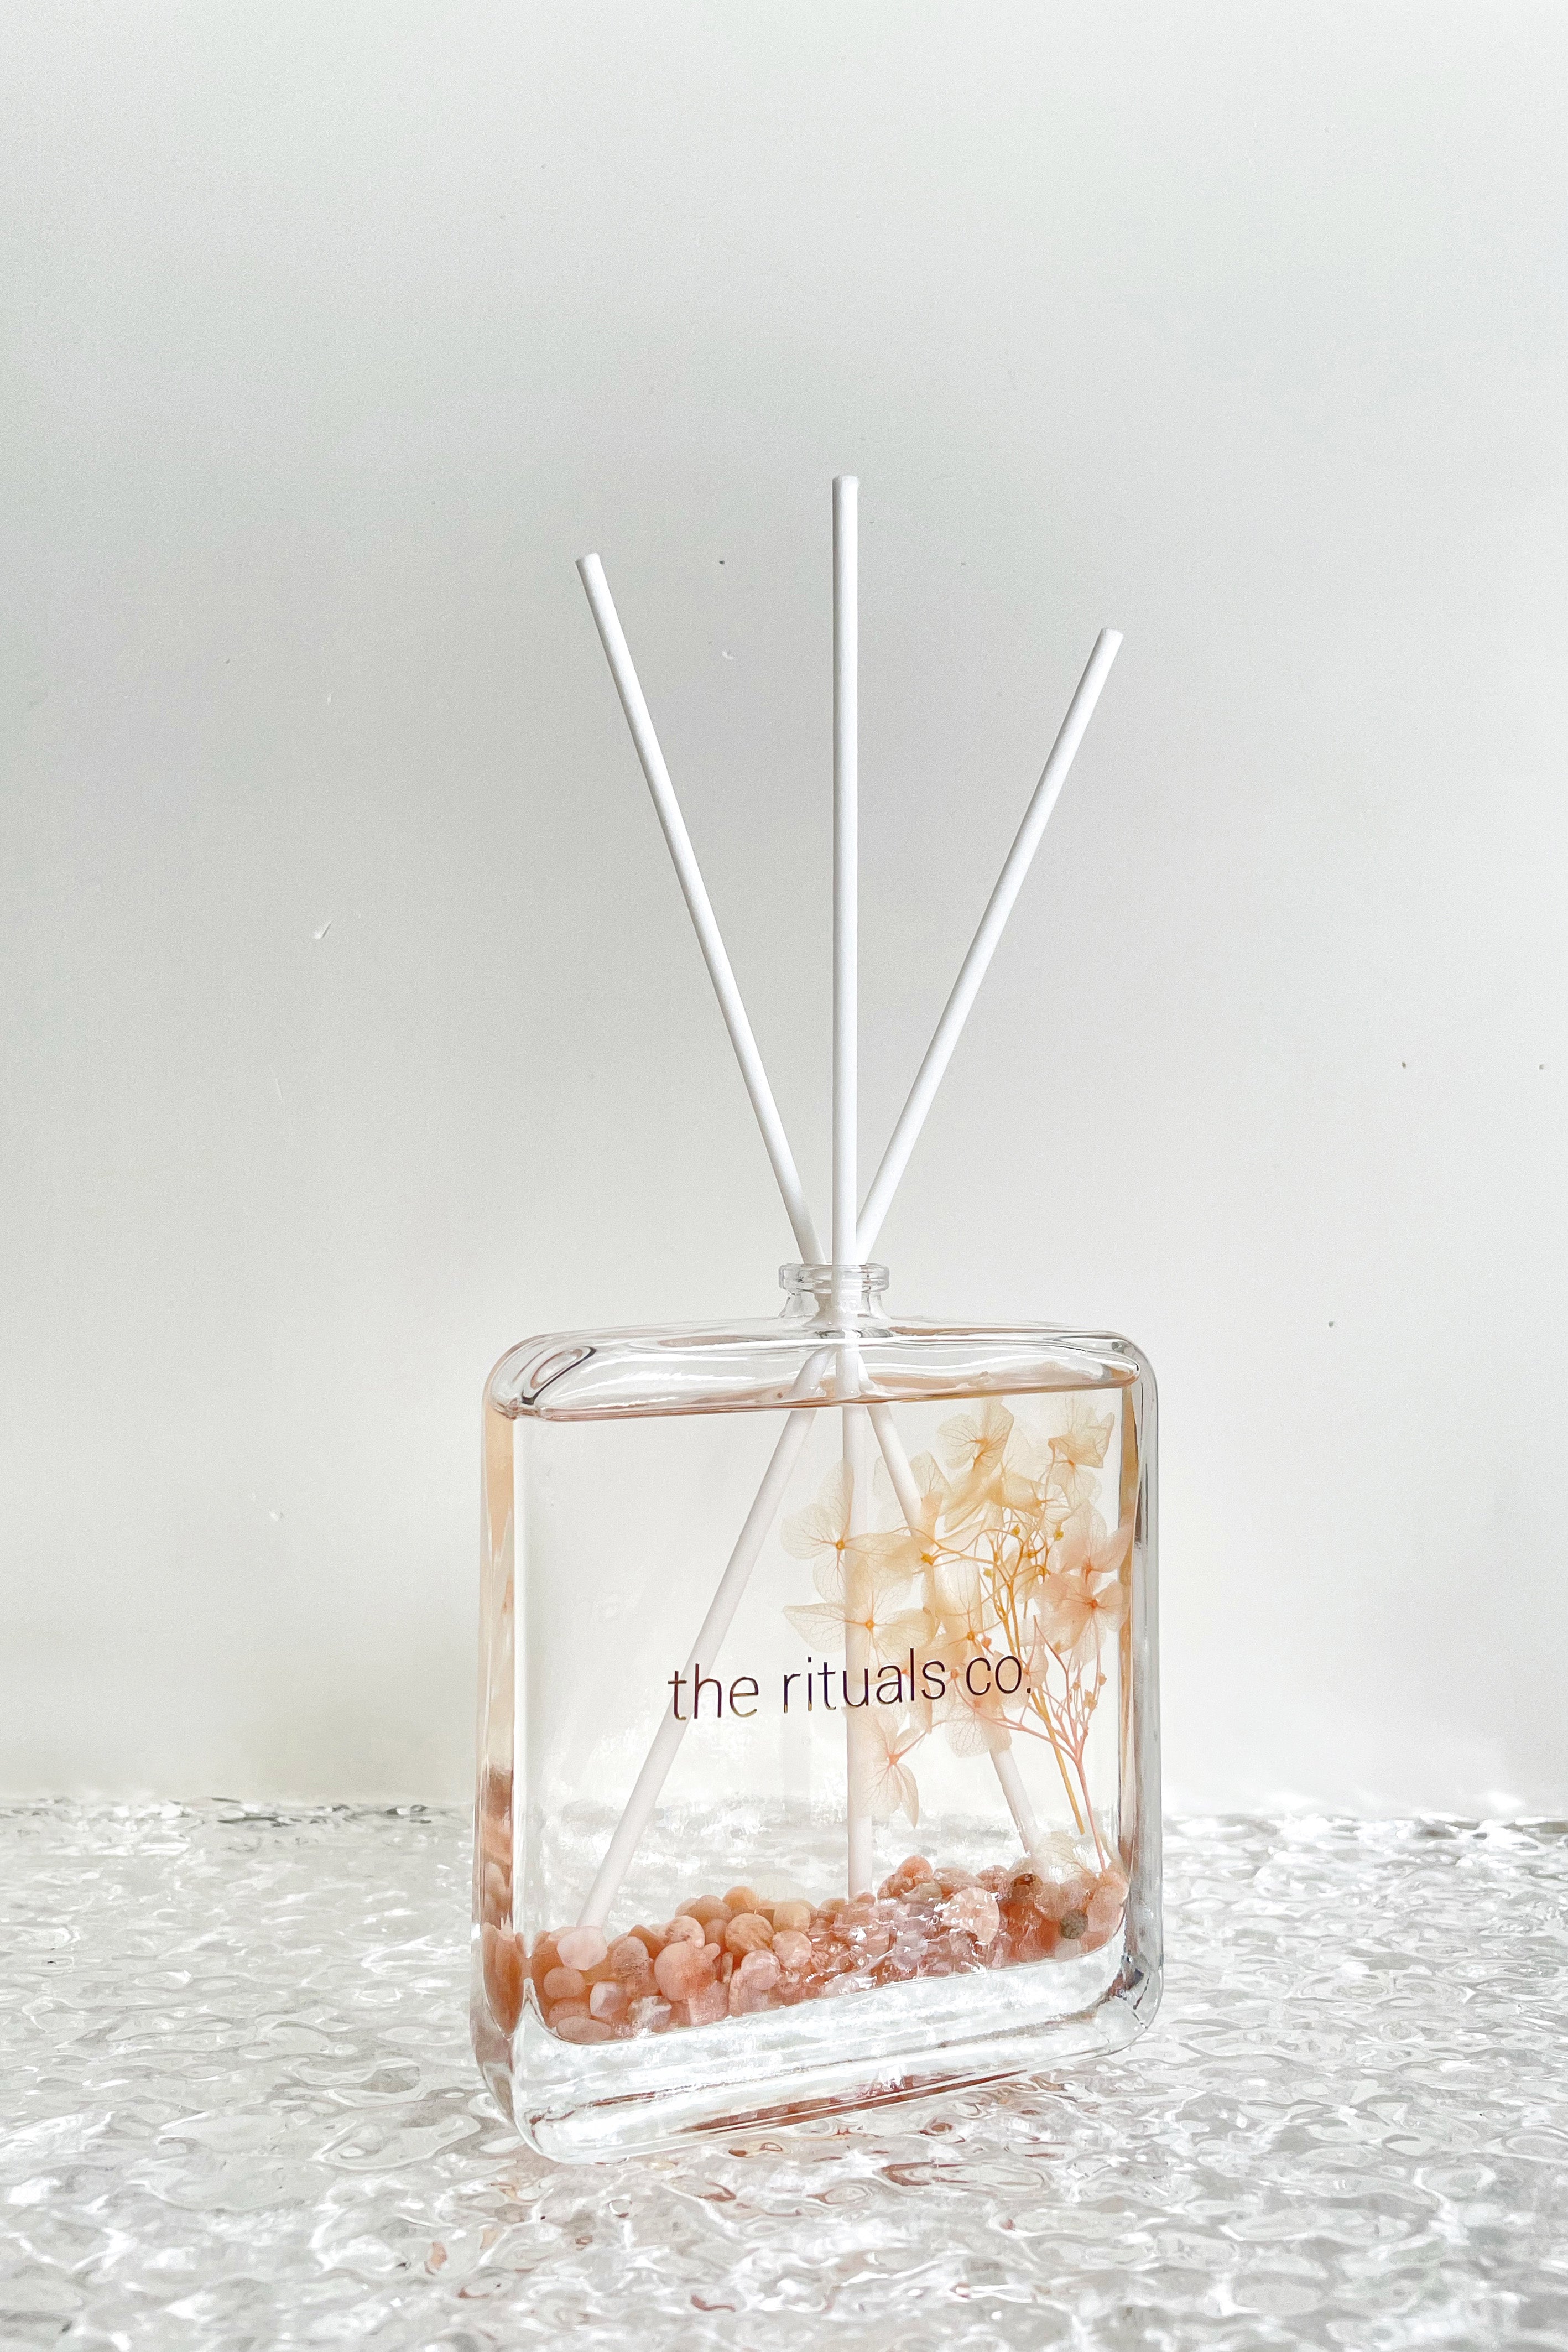 Rituals Co Crystal Reed Diffuser (Lavender White Tea) – Bells & Birds